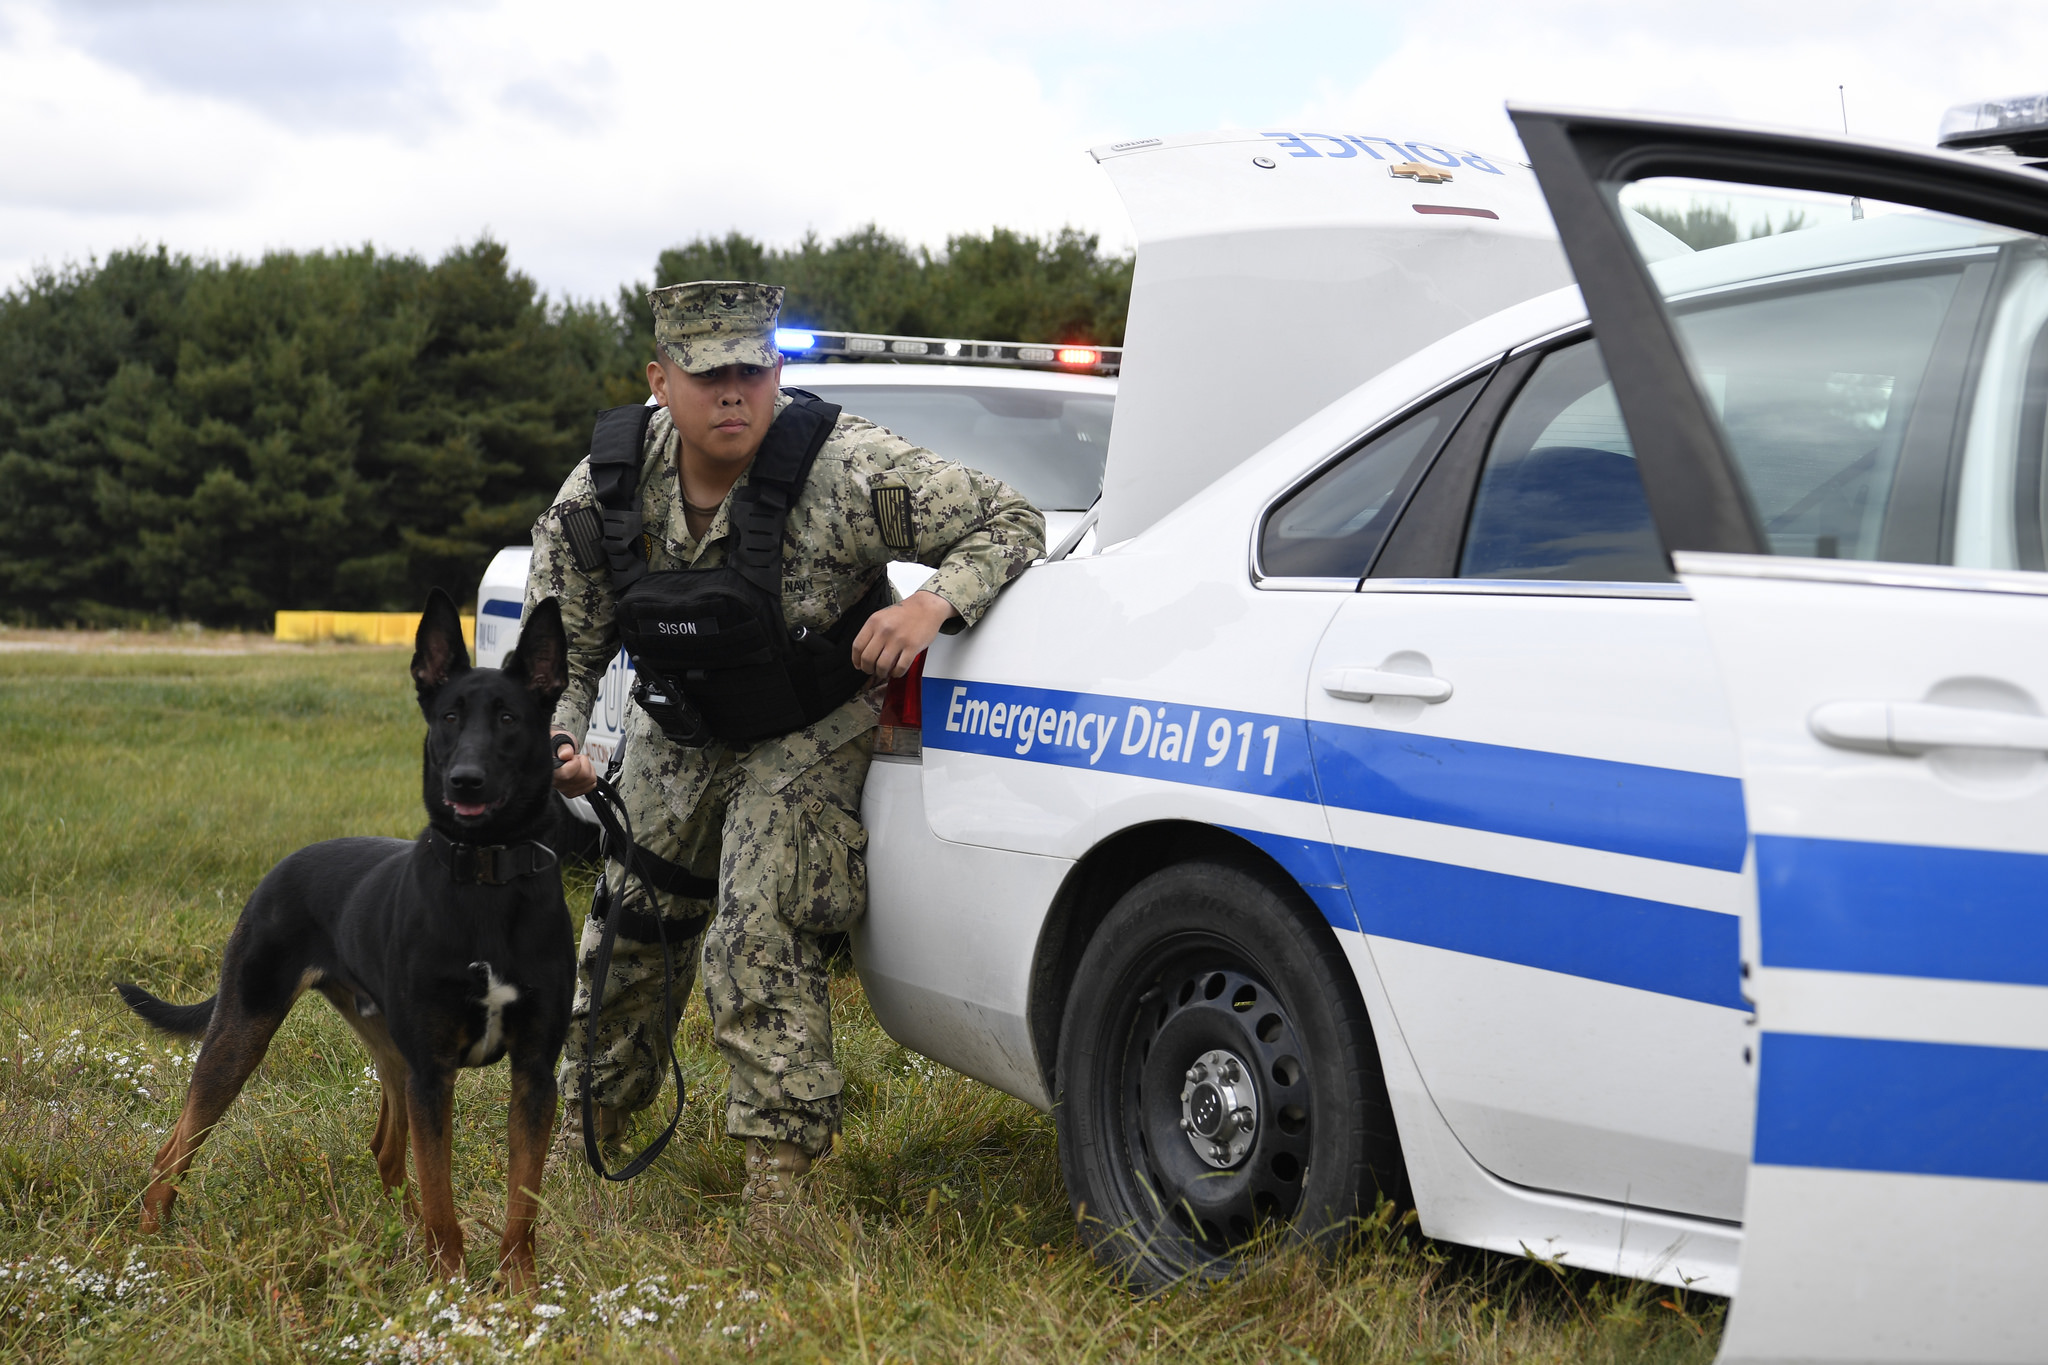 MPD Welcomes Newest Member to K9 Unit City of Medford